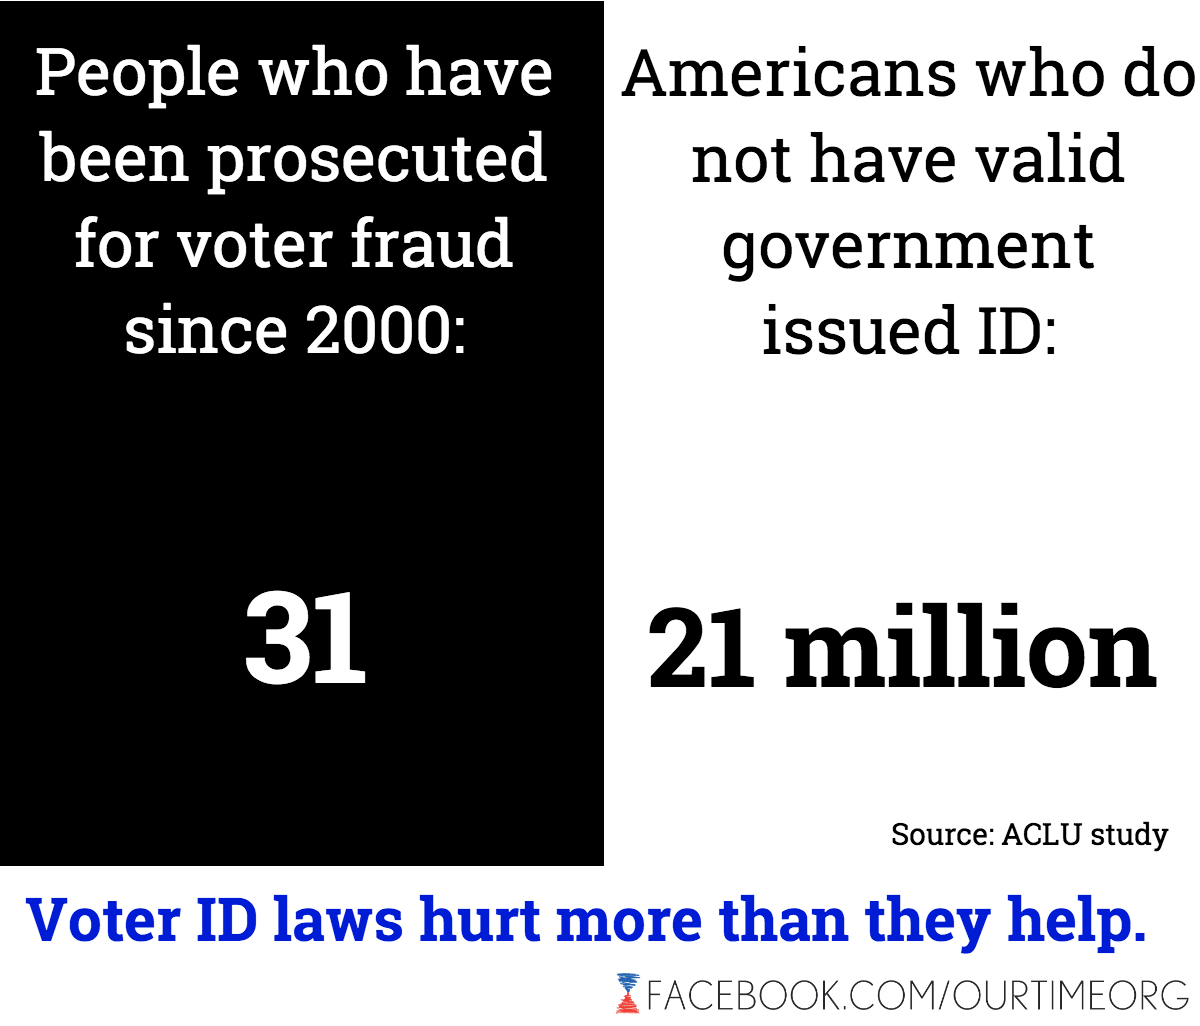  31 Cases of Voter Fraud Since 2000, 21 Million Voters Lack ID